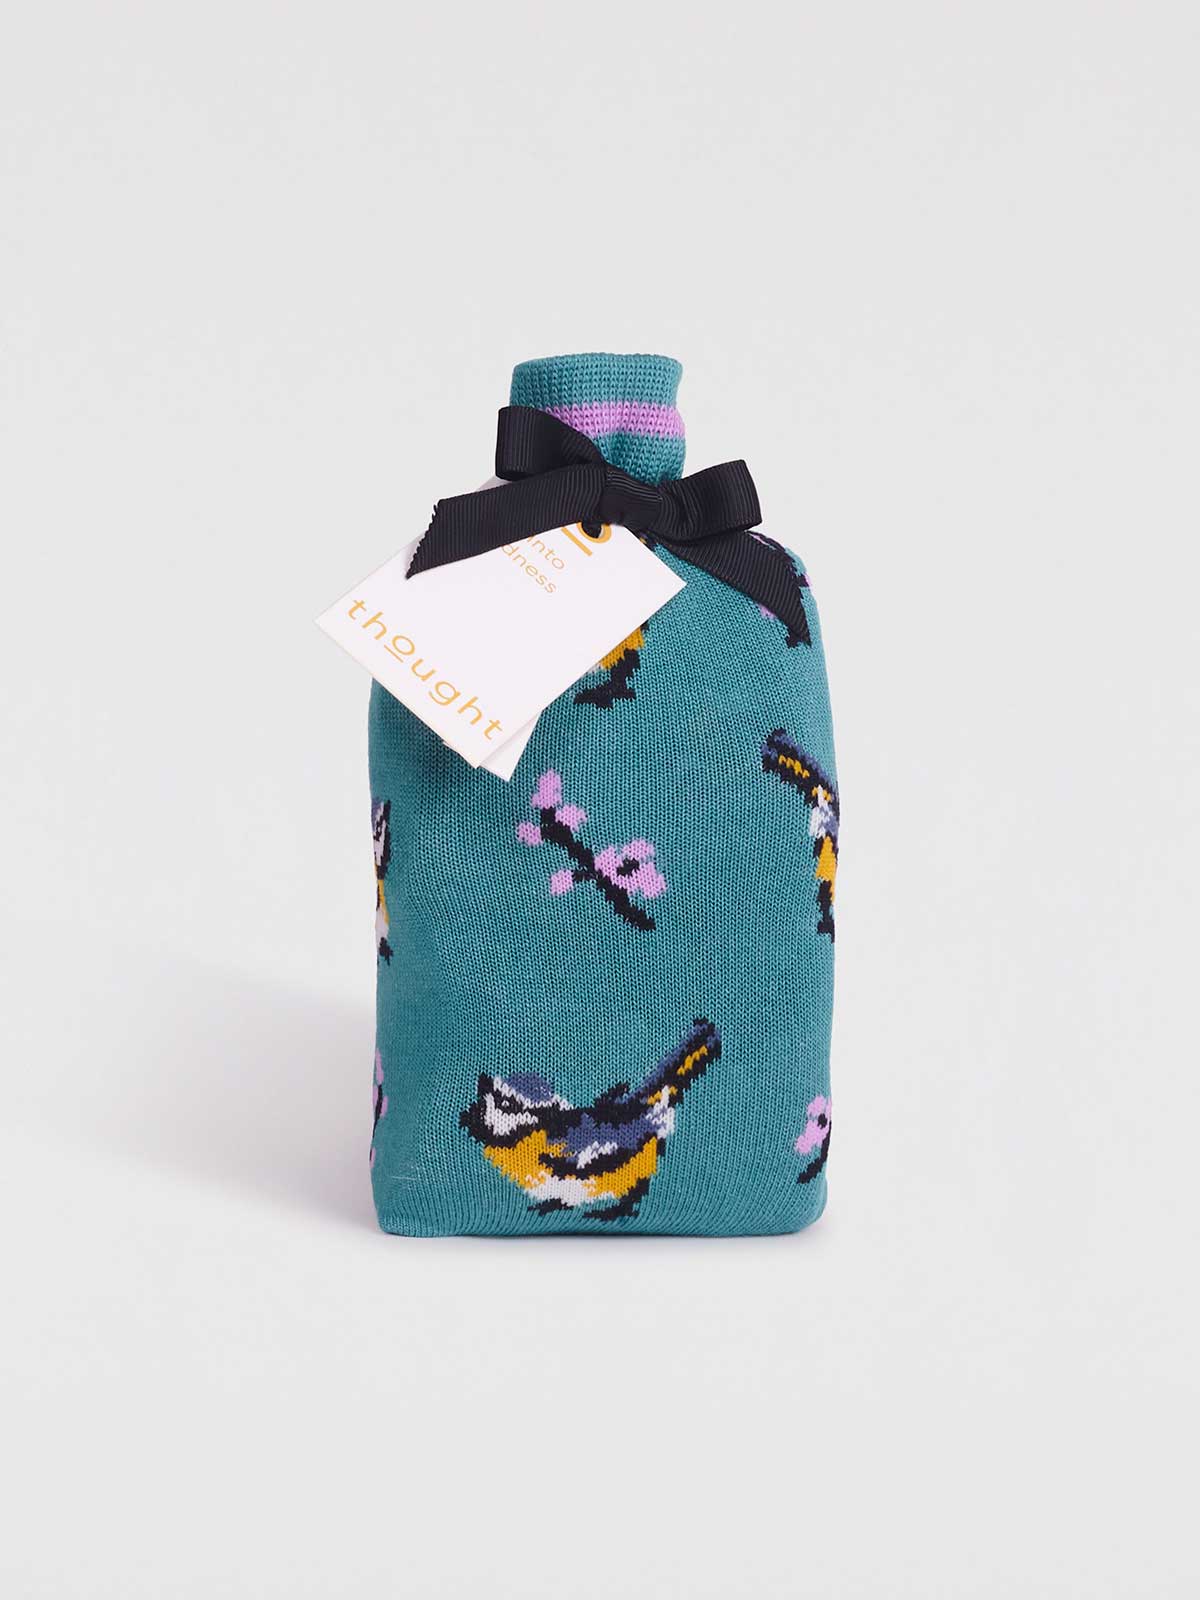 A small knitted blue bag with blue tit and pink blossom design, tied with a ribbon